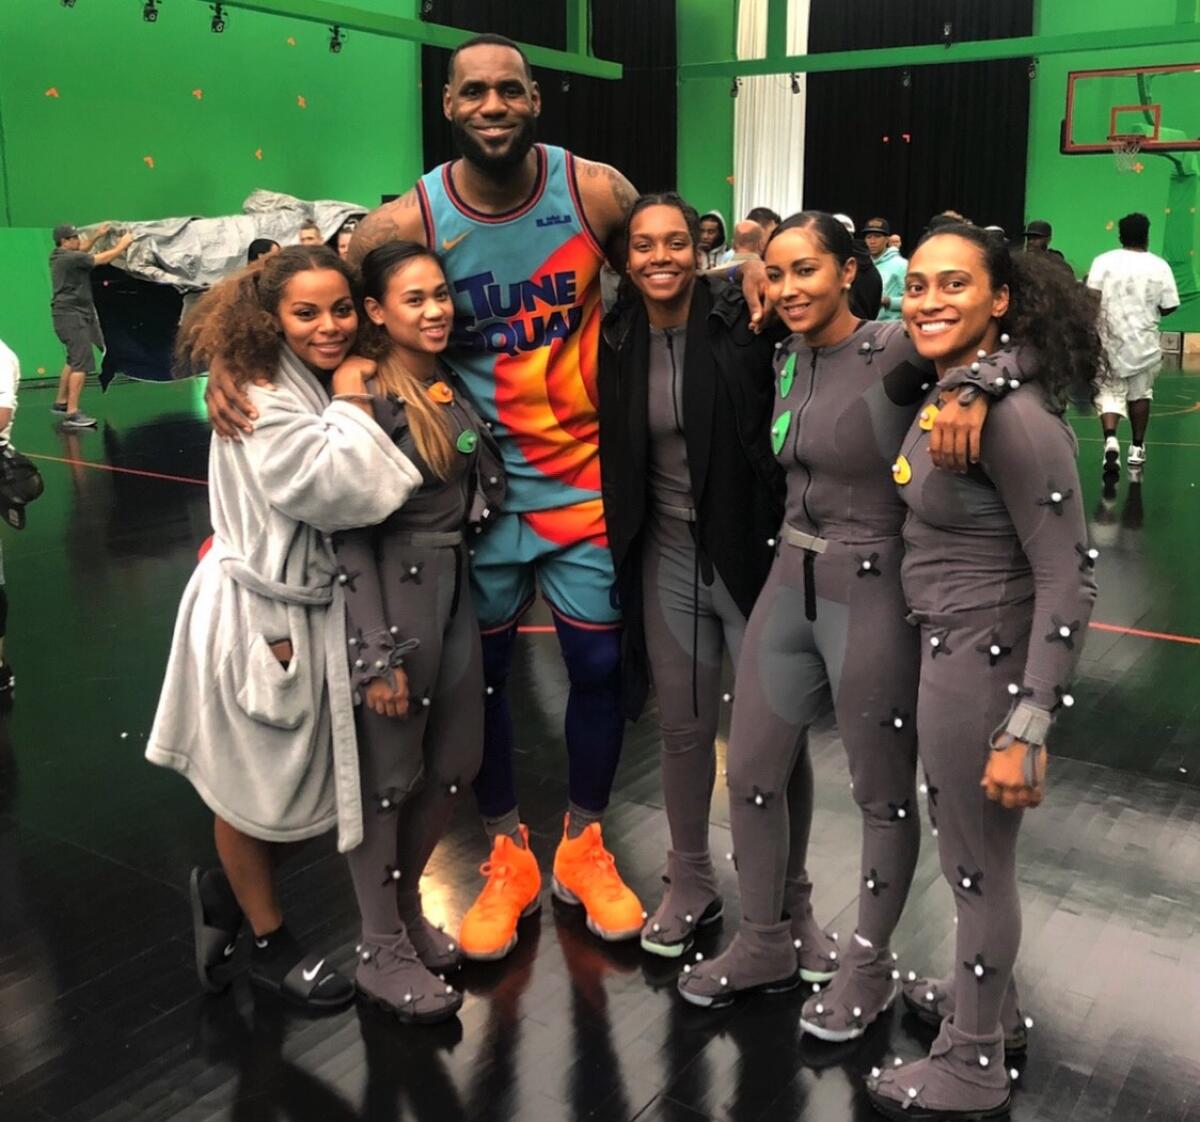 Darxia Morris (black sweater) and Mariah Williams (far right) pose for a photo with LeBron James and Tune Squad members.